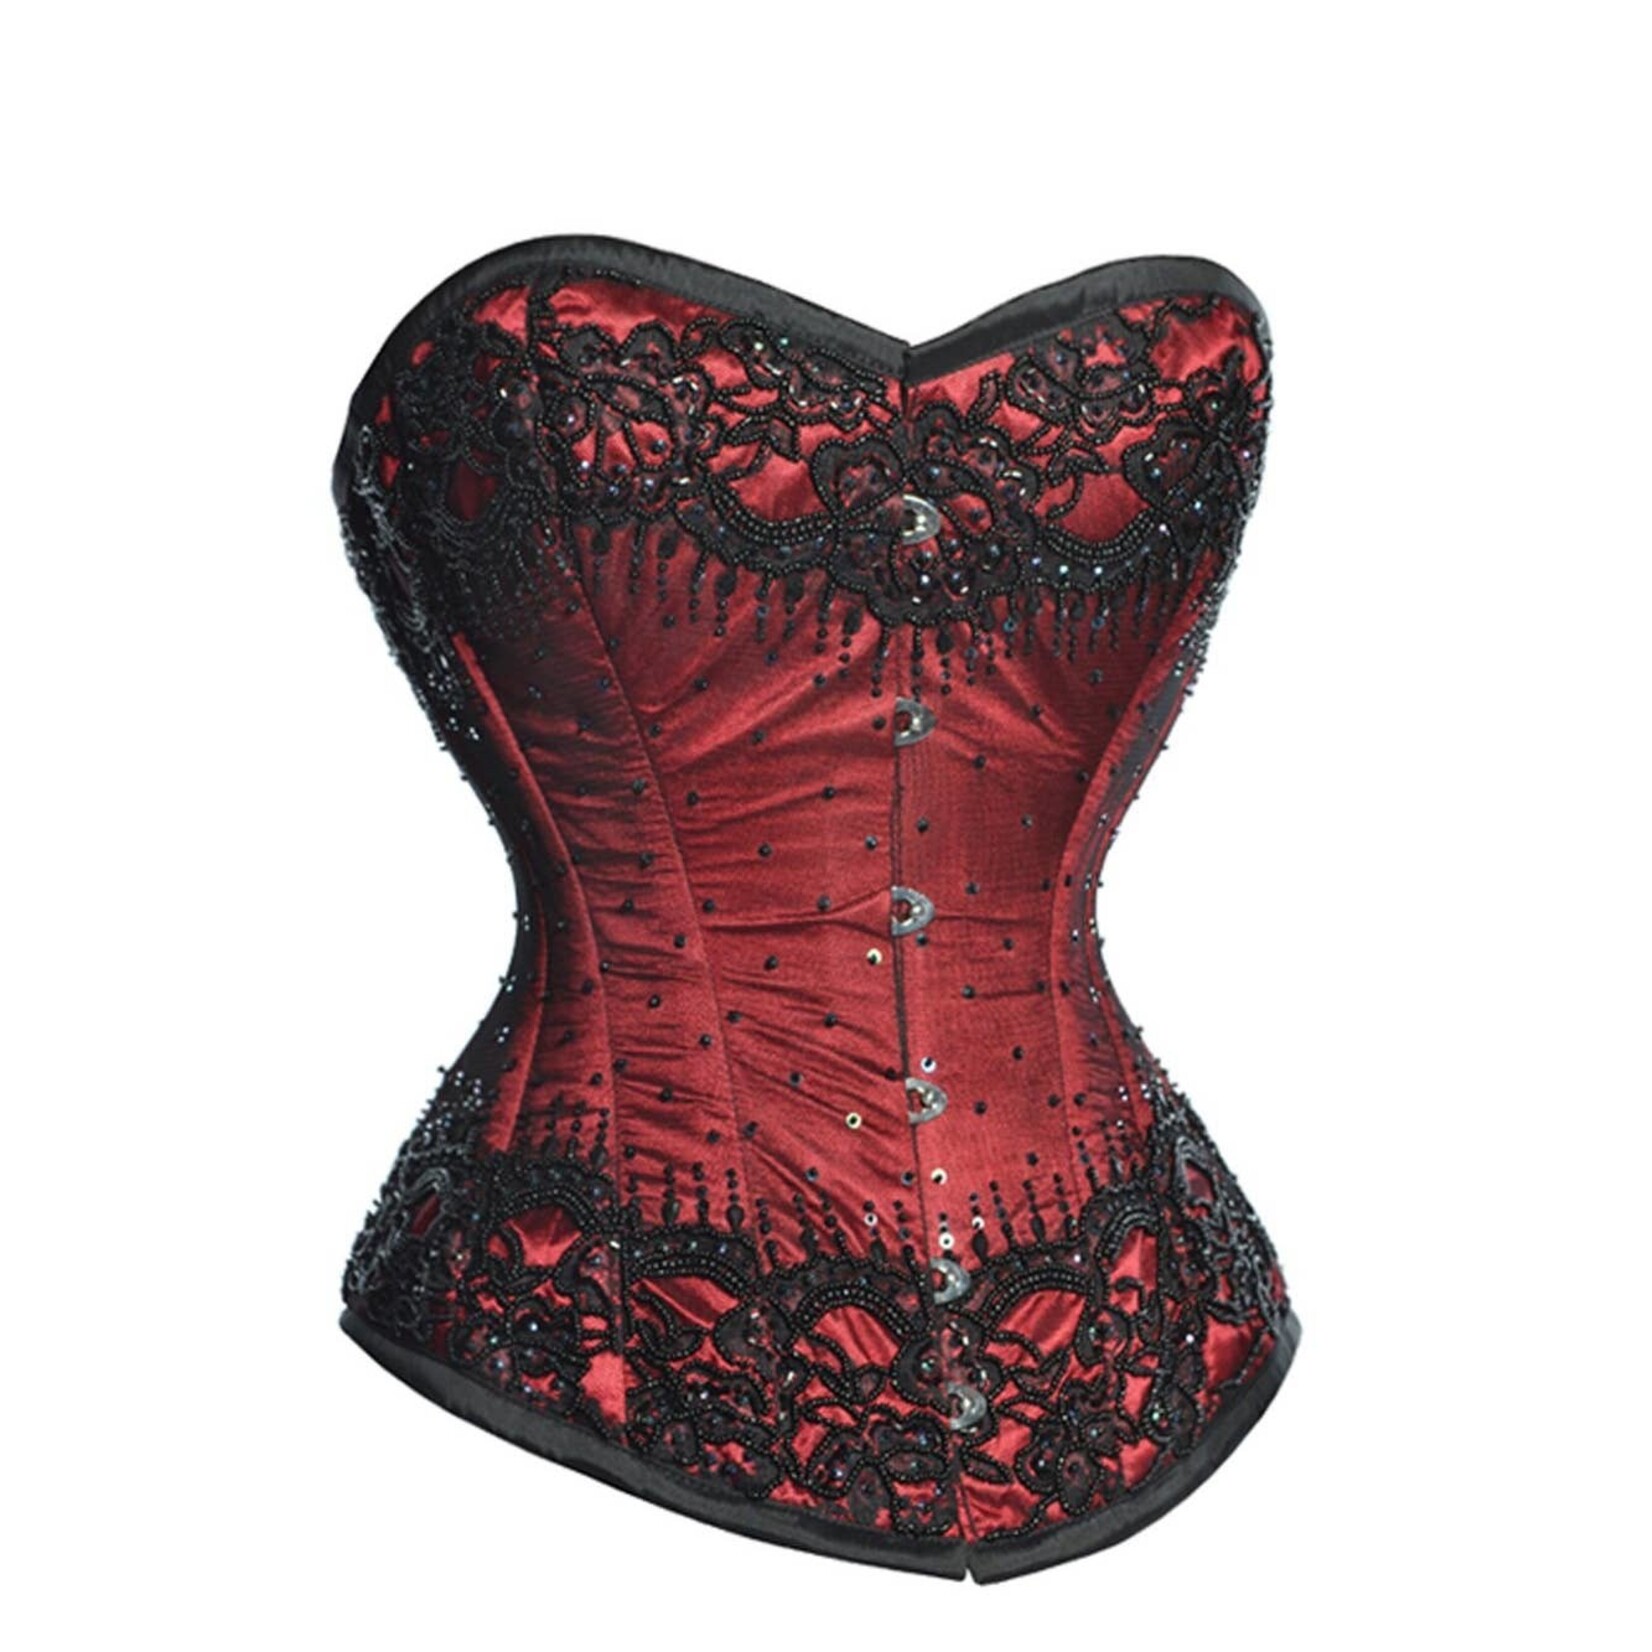 Corset Story Burgundy Satin Couture Corset 34in/37-39in